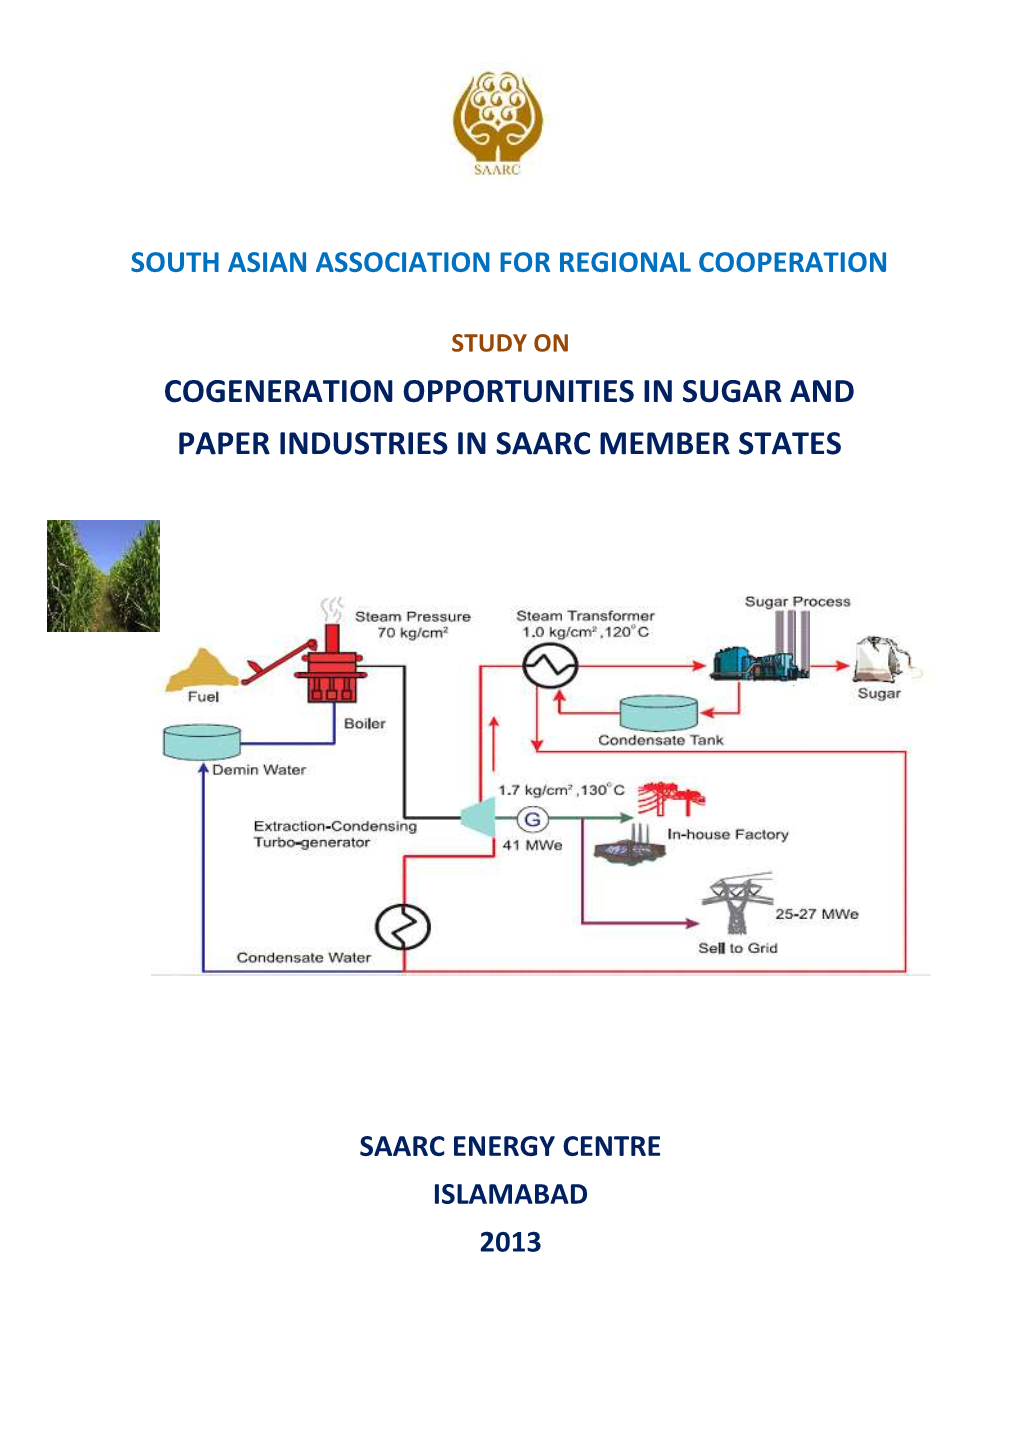 Cogeneration Opportunities in Sugar and Paper Industries in Saarc Member States